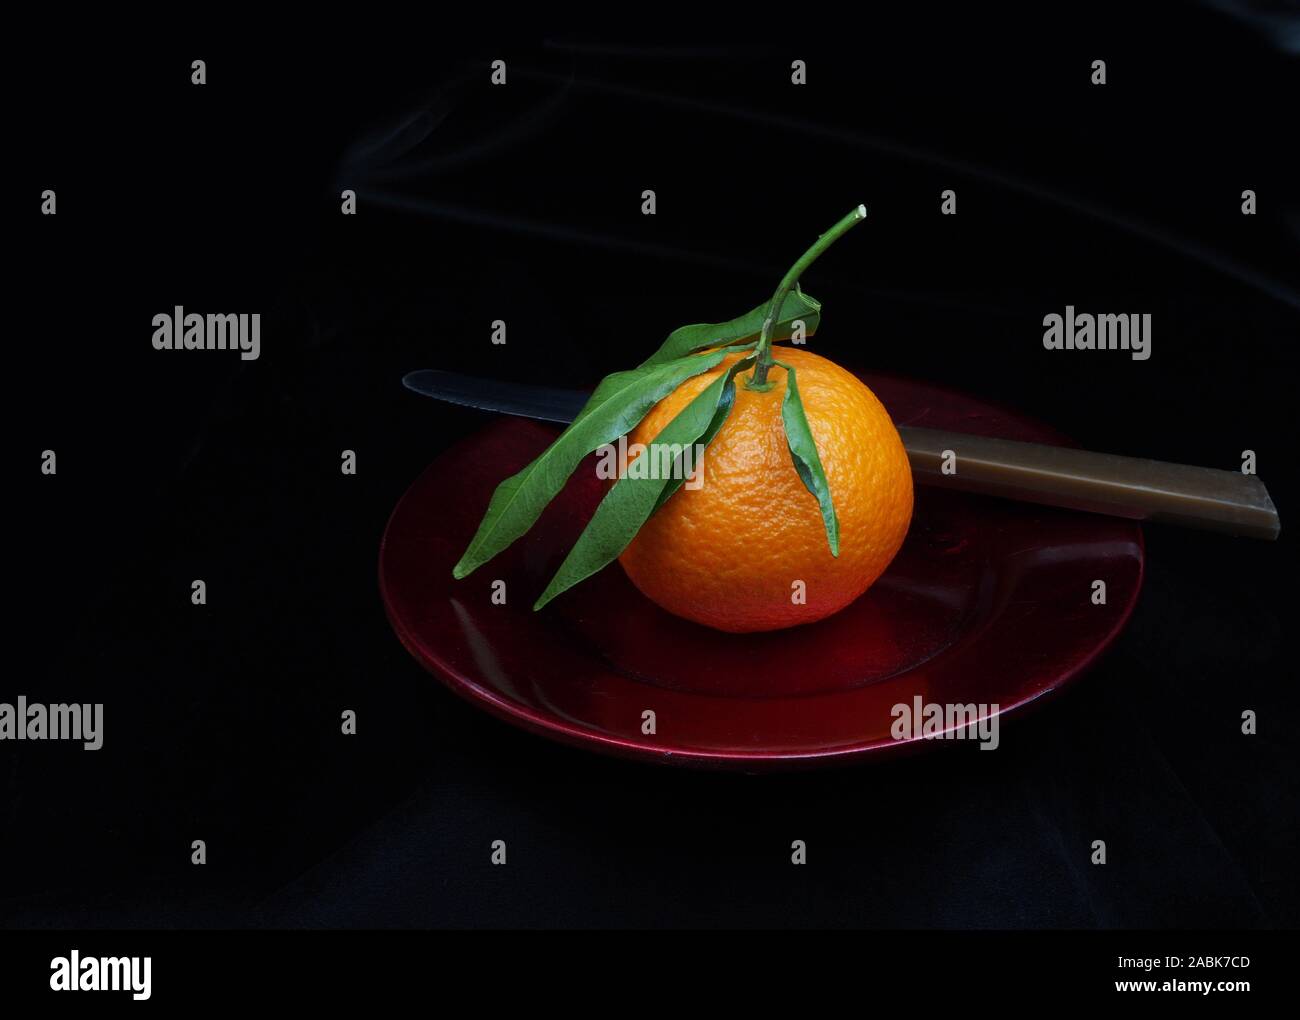 Mandarin type small orange on red plate, with leaves. Whole, unpeeled. With knife, dark background. Stock Photo